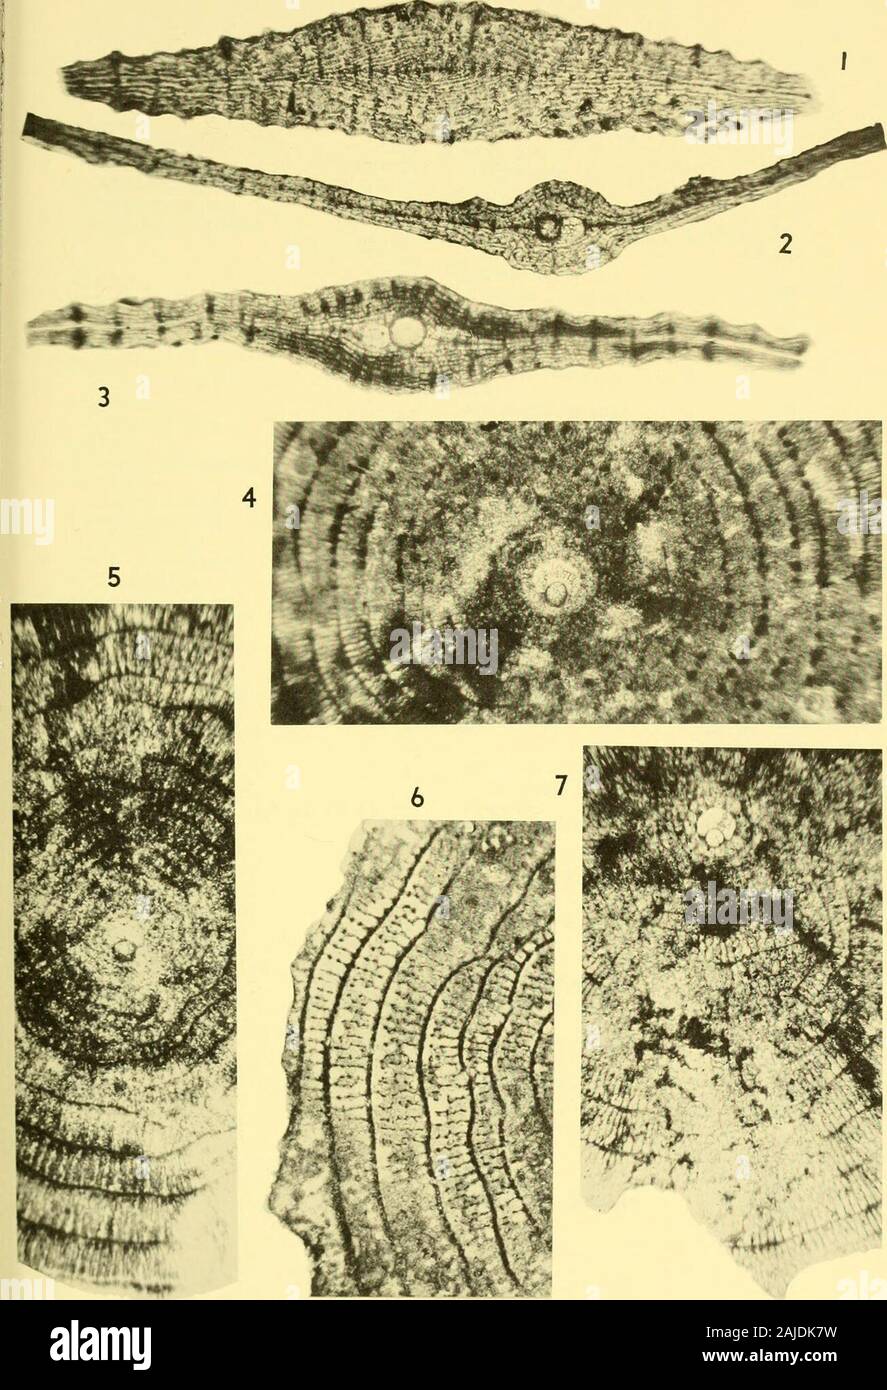 Bulletins of American paleontology . 4 — Baja California, middle Eocene.See text for locality descriptions. 52 Bulletin 248 Explanation of Plate 9 Figure Page All figures x 40 1-5,7. Pseudophragmina (Pseudophragmina) bainbridgensis (Vaughan) 11, 12, 14 1,3. Vertical sections of topotpes of Pseiid(&gt;l)liui^iiiiiin (Pseudo-phragmina) novitasensis Vaughan. 1. Evenly lenticular speci-men, section not exactly centered. 3. Umbonate specimen. 2.Vertical section of a topotype of P. (Pseudophragmina) bain-bridgensis var. angusta Vaughan. 4,5. Parts of equatorial.sections of topotypes of P. (P.) novi Stock Photo